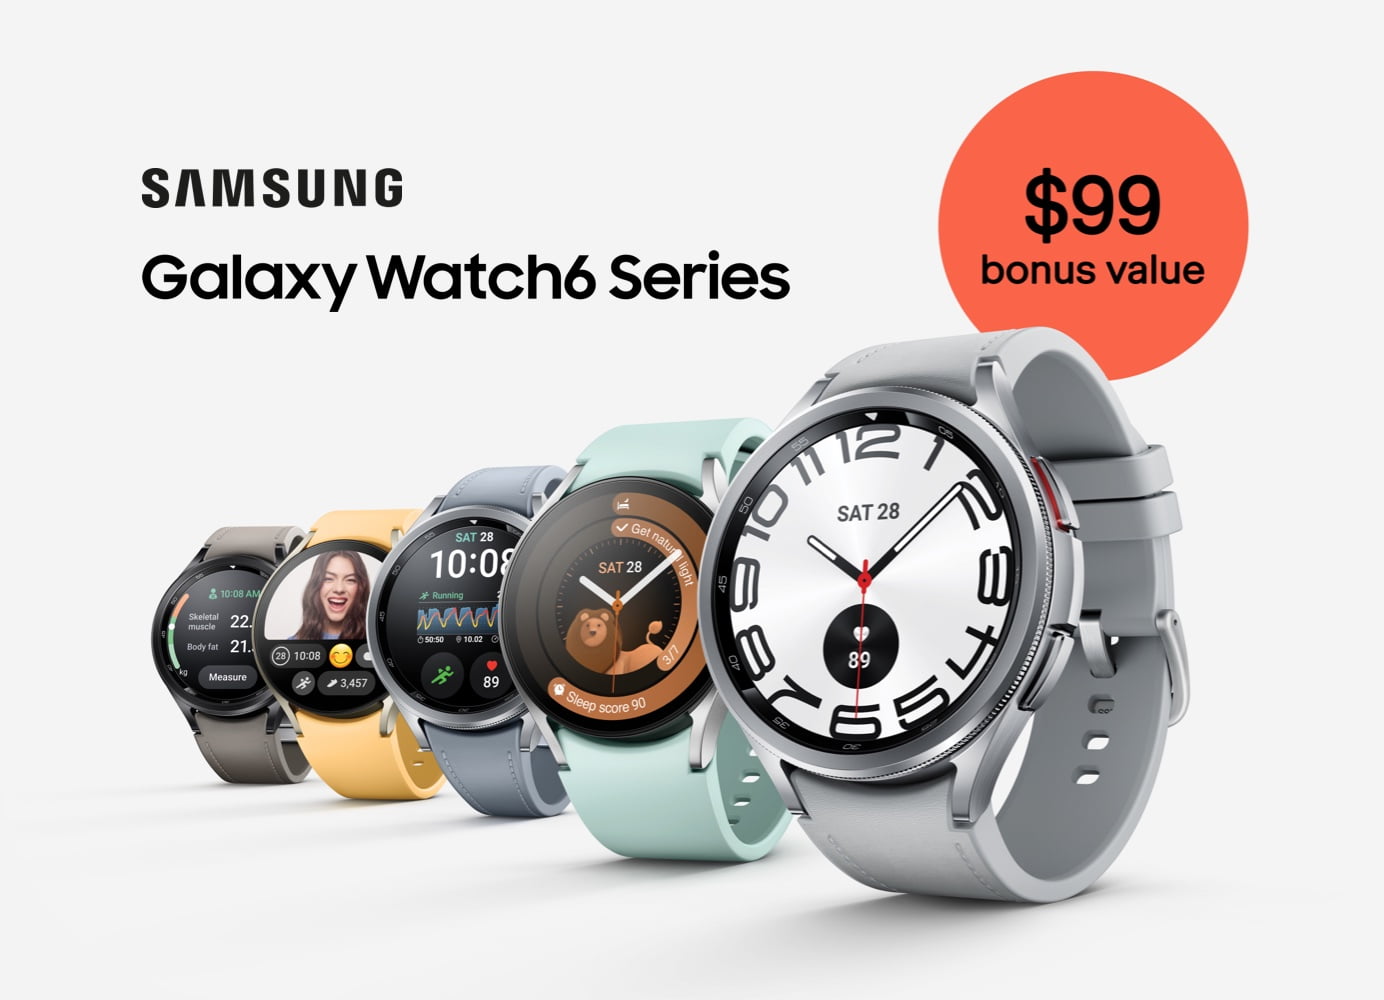 The Galaxy Watch6 Series in all available colours. Text on image: Galaxy Watch6 Series, $99 bonus value